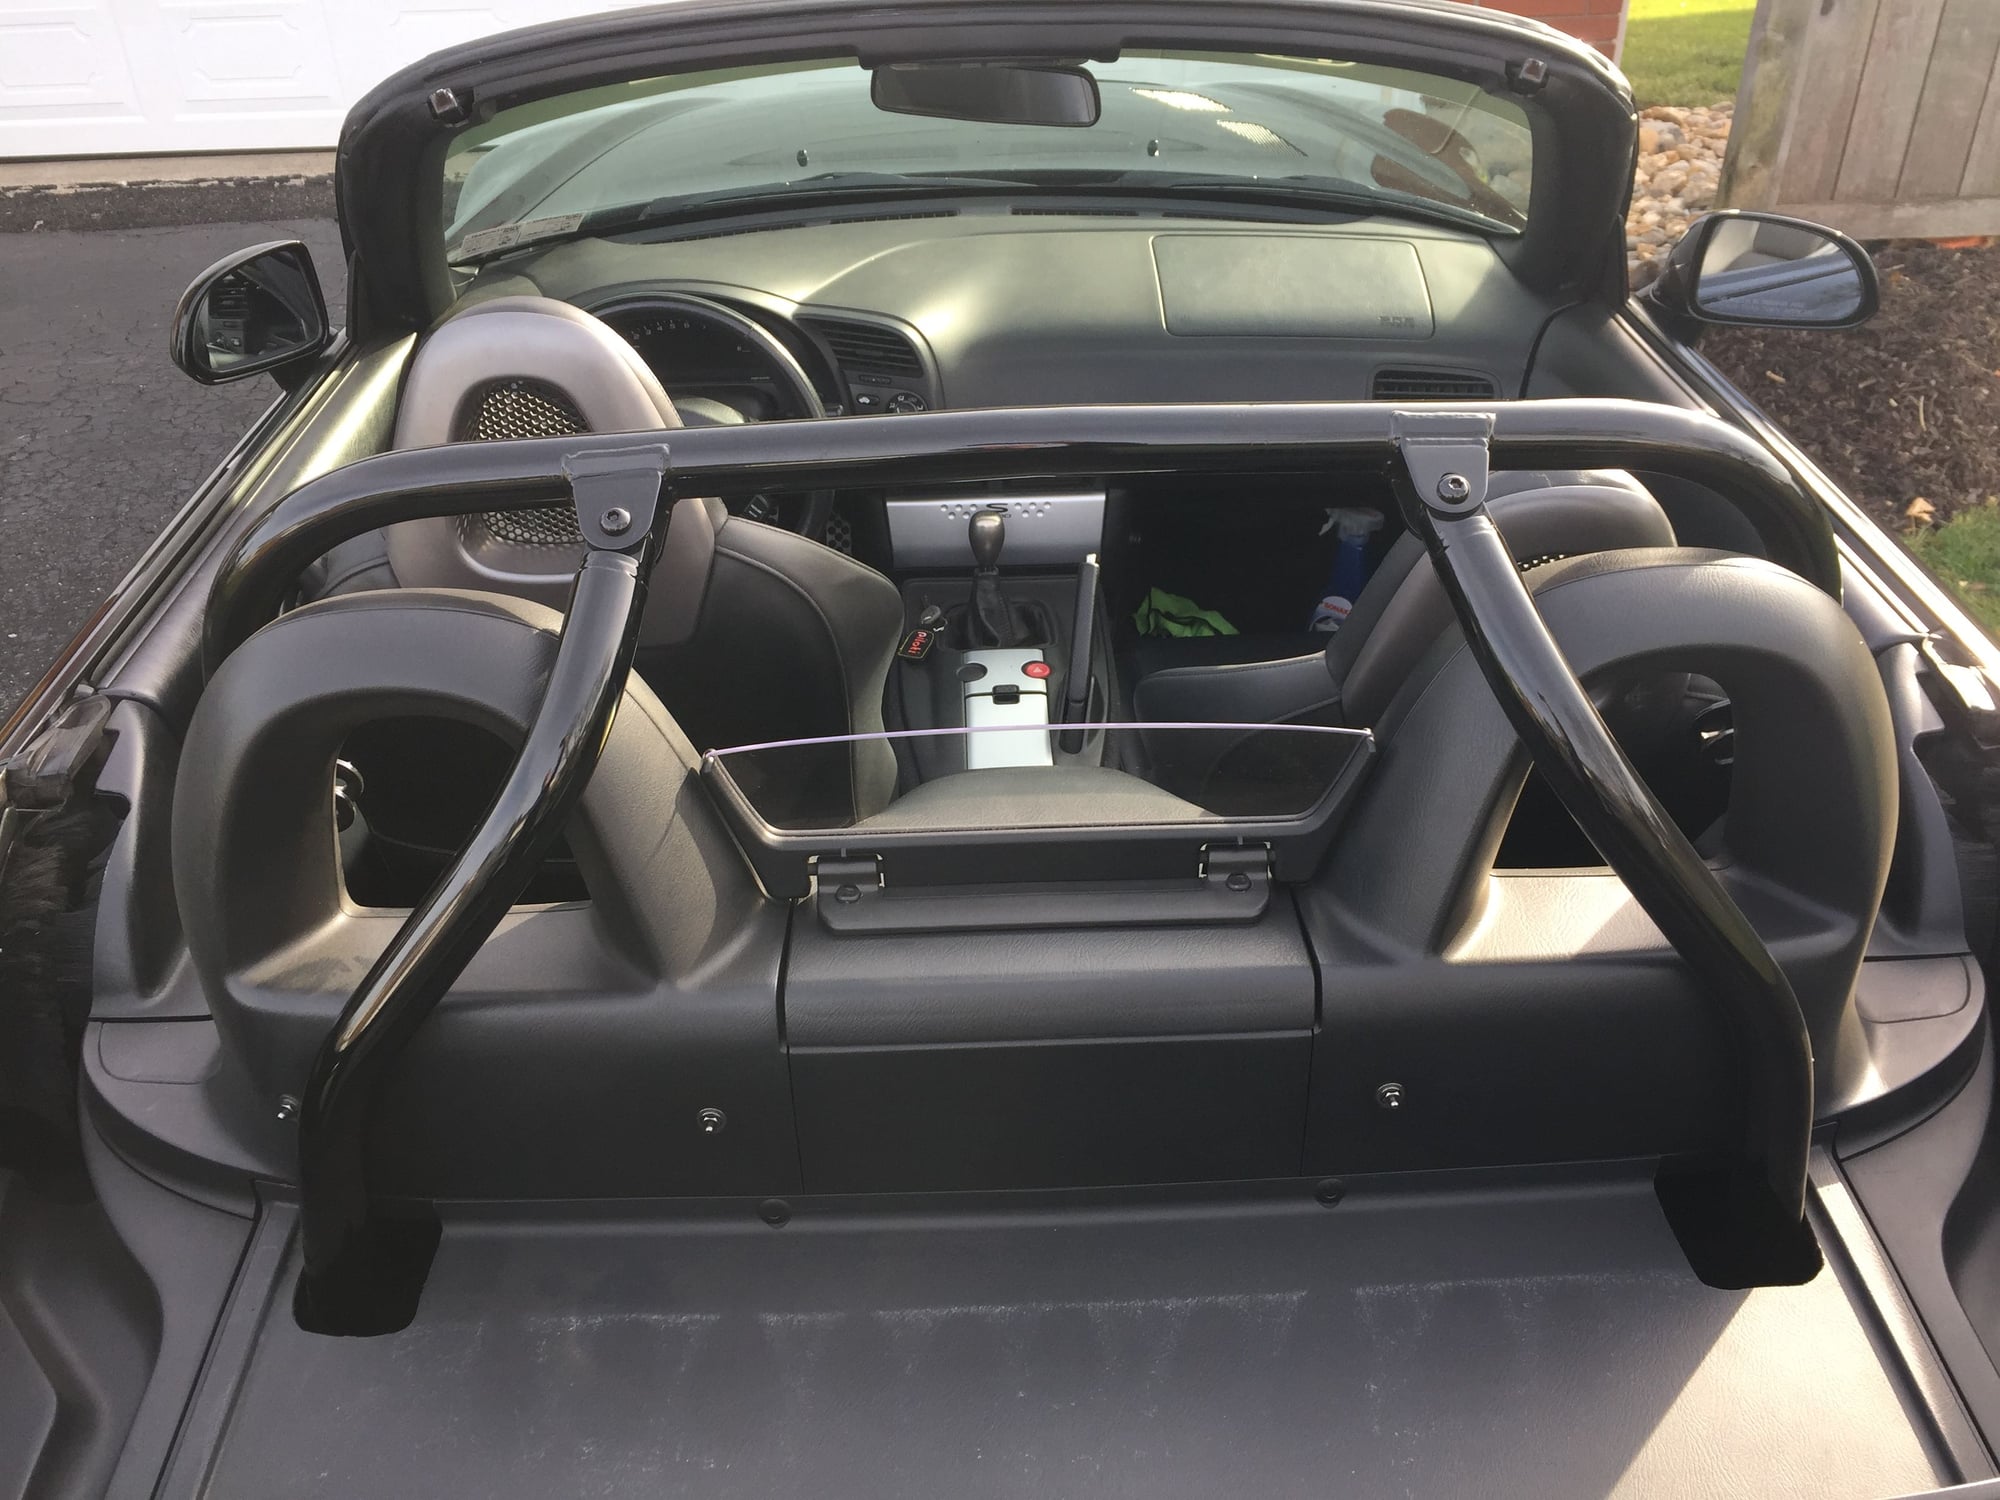 PA FS: Safety 21 4 Point Roll Bar w/ Harness Bar (removable) .